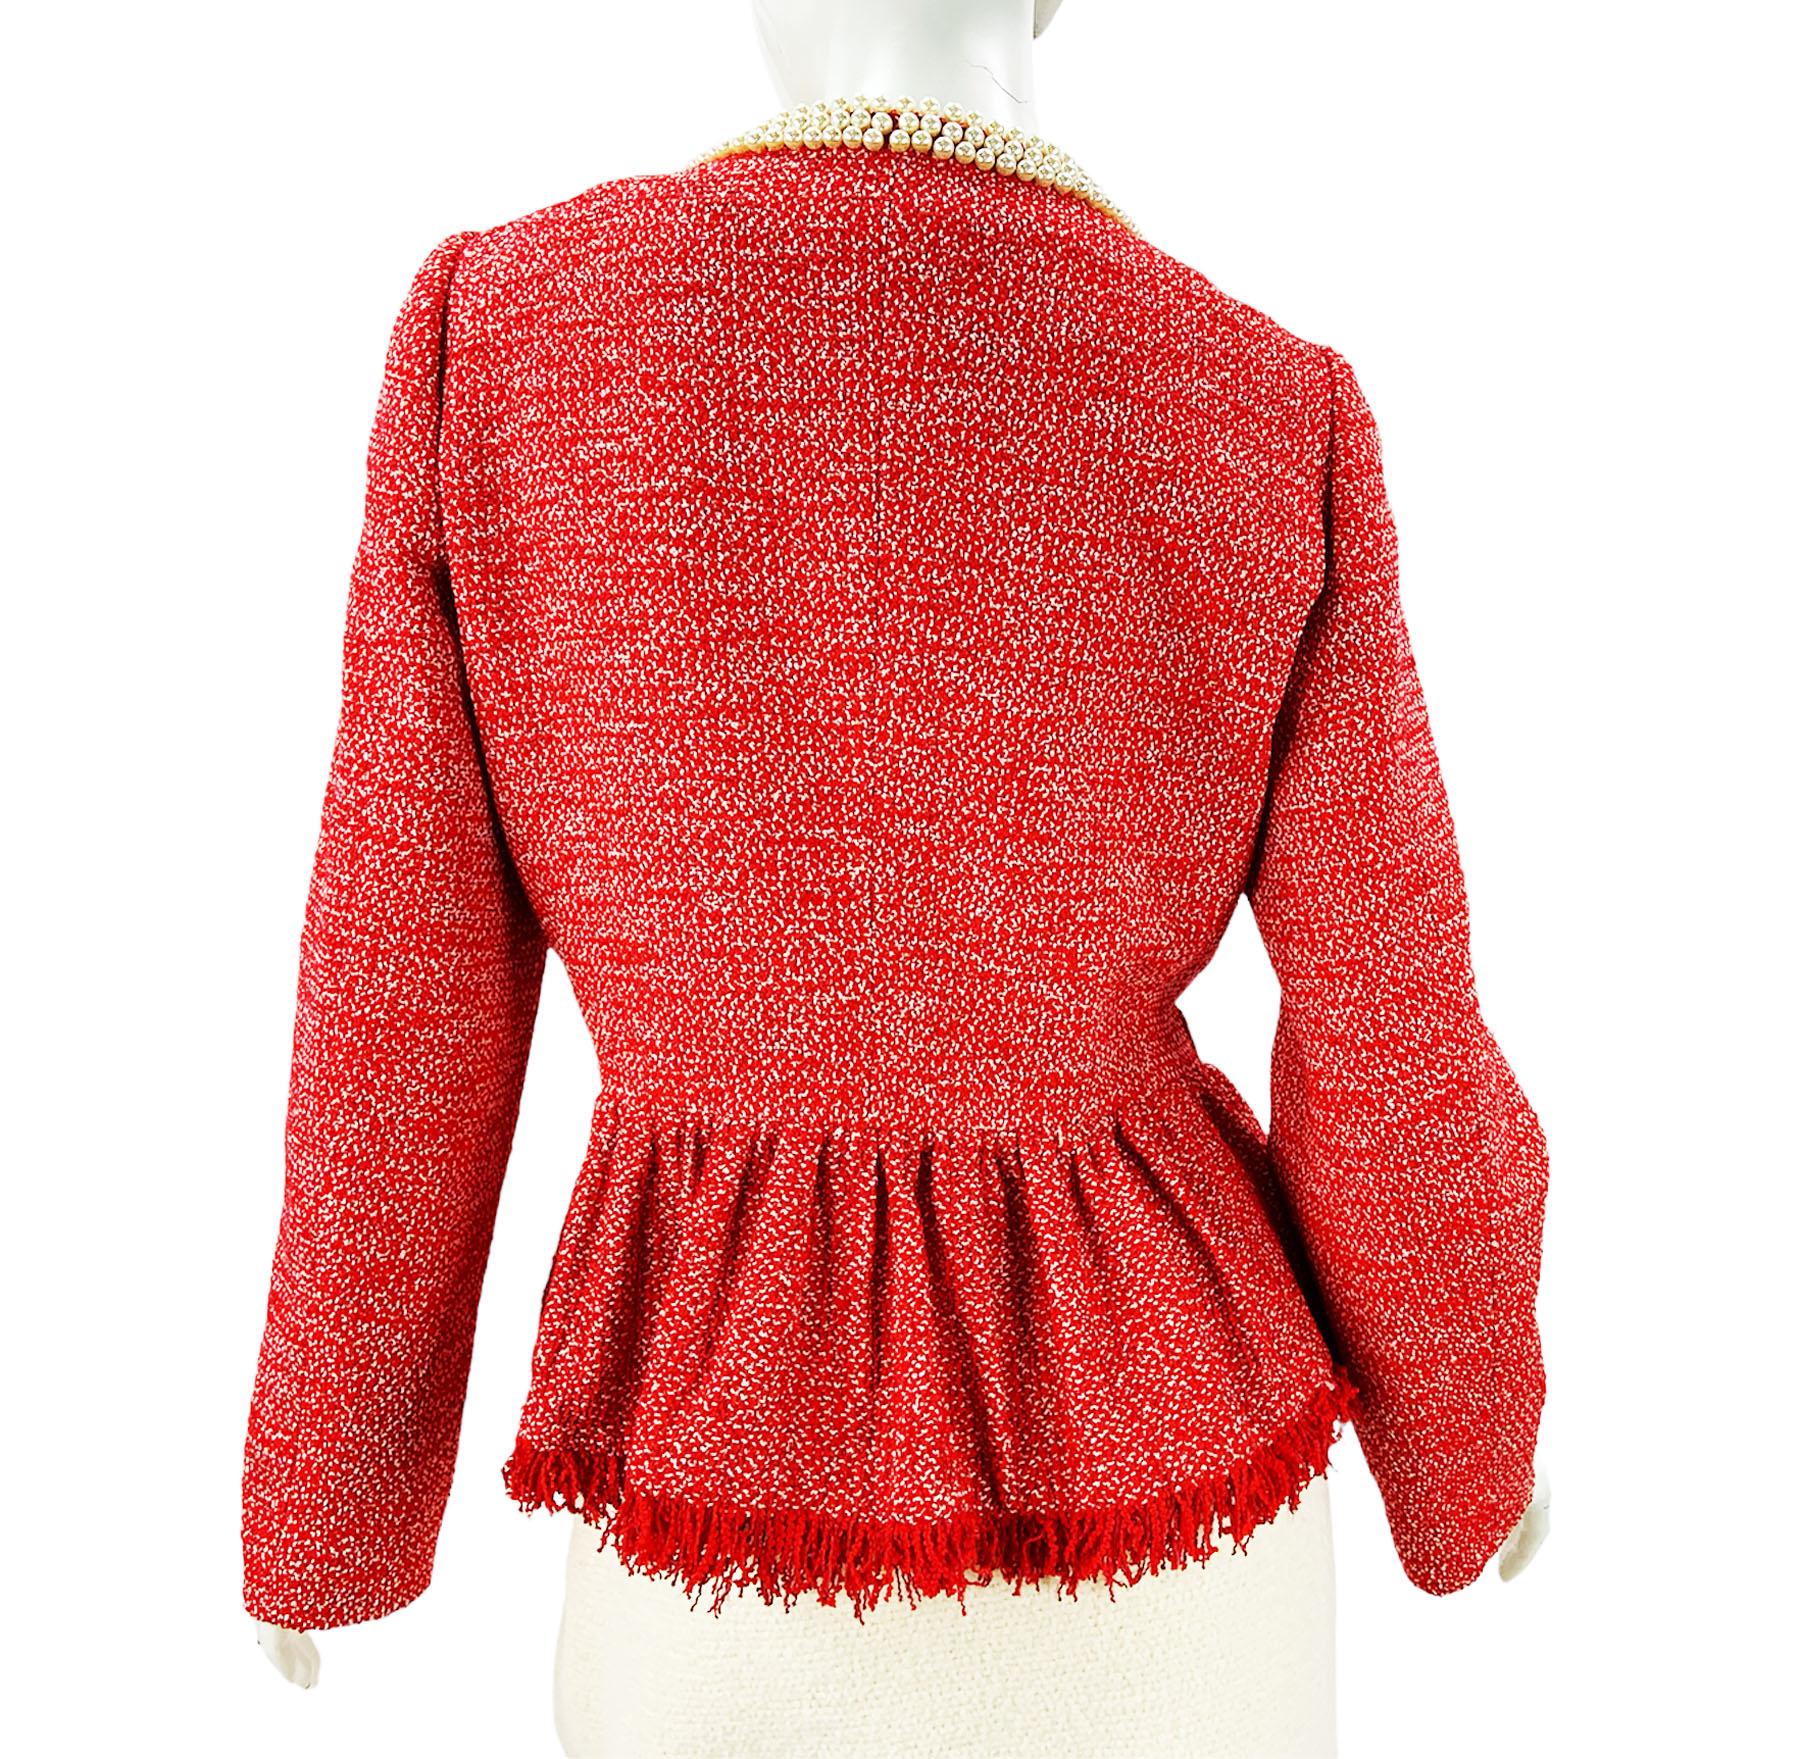 Moschino Pearl Embellished Red Peplum Boucle Jacket Italian 46 - US 12 In Excellent Condition For Sale In Montgomery, TX